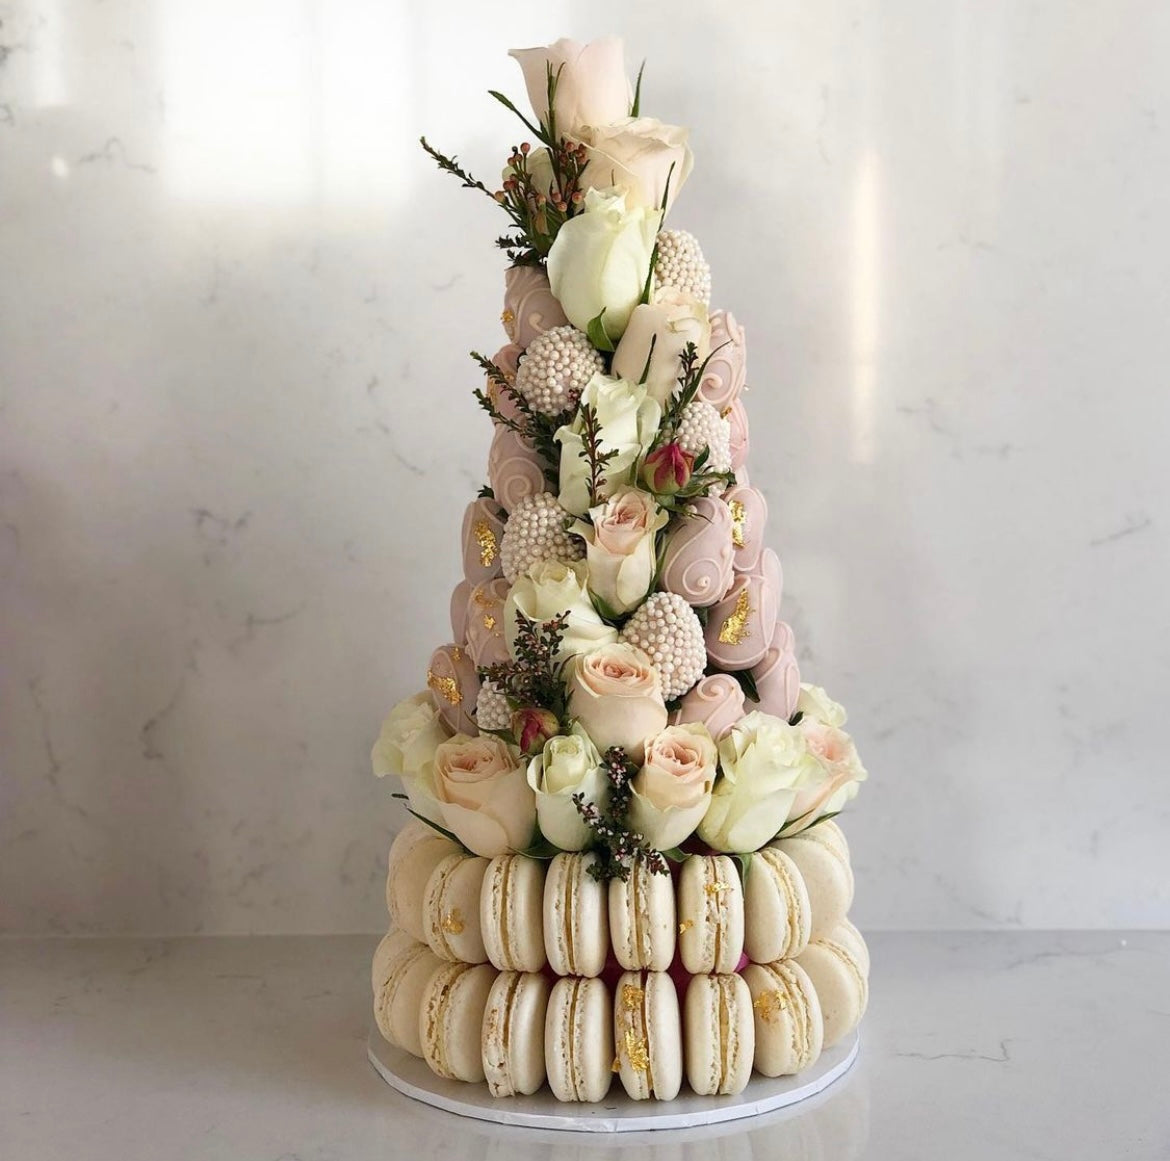 2 In 1 Strawberry And Macaron Tower